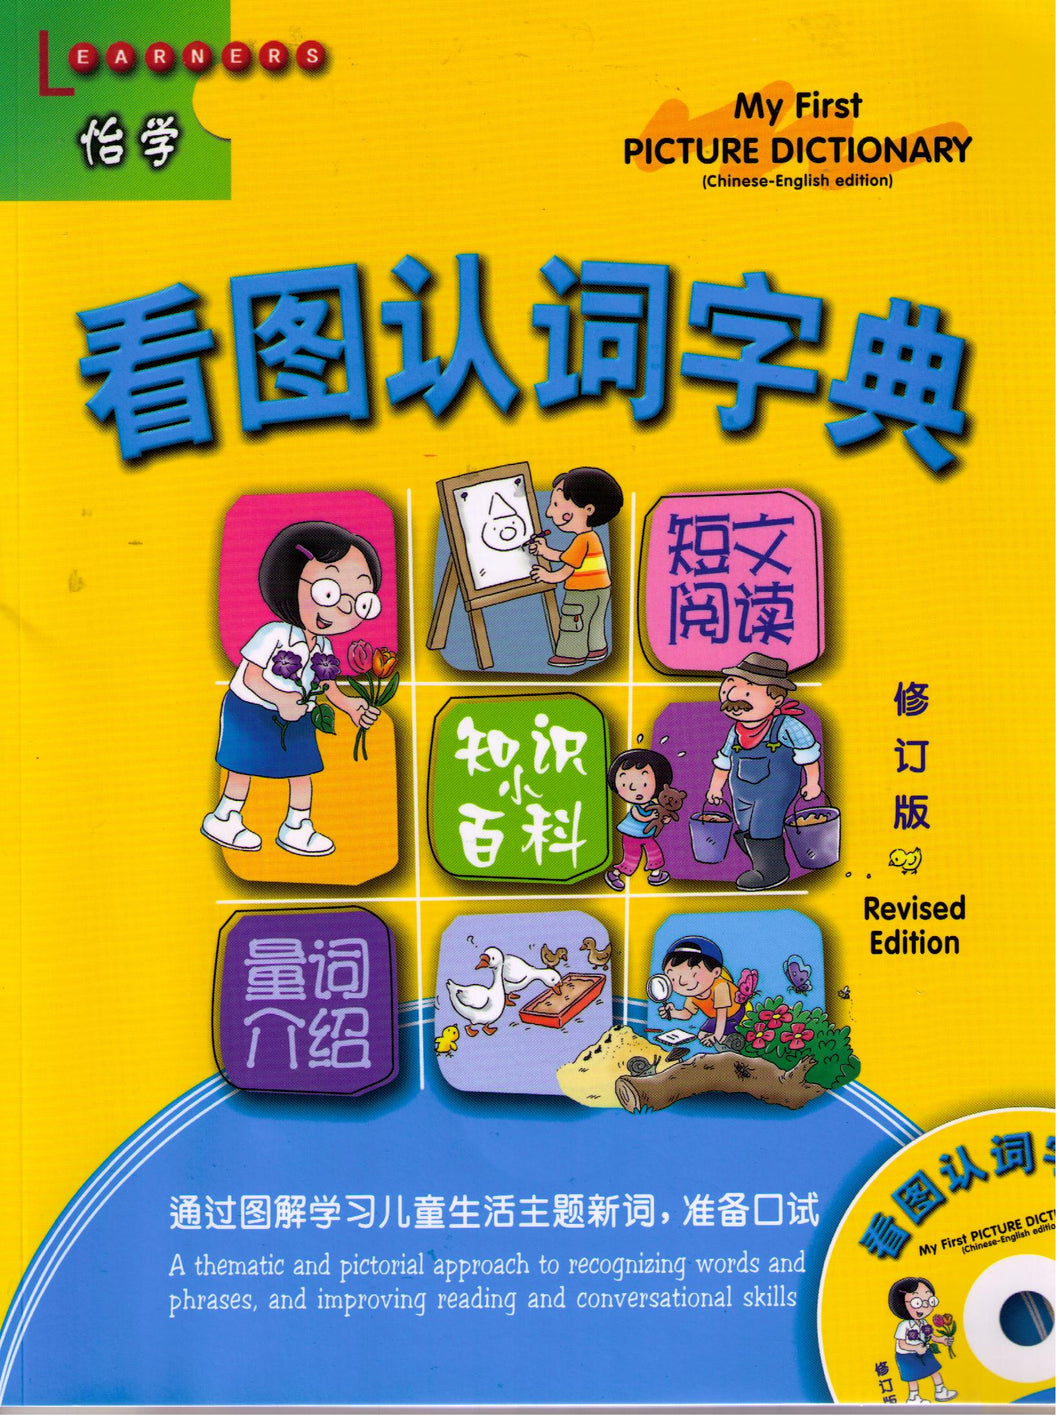 My First Picture Dictionary(Chinese-English edition) +2CDs看圖認詞字典